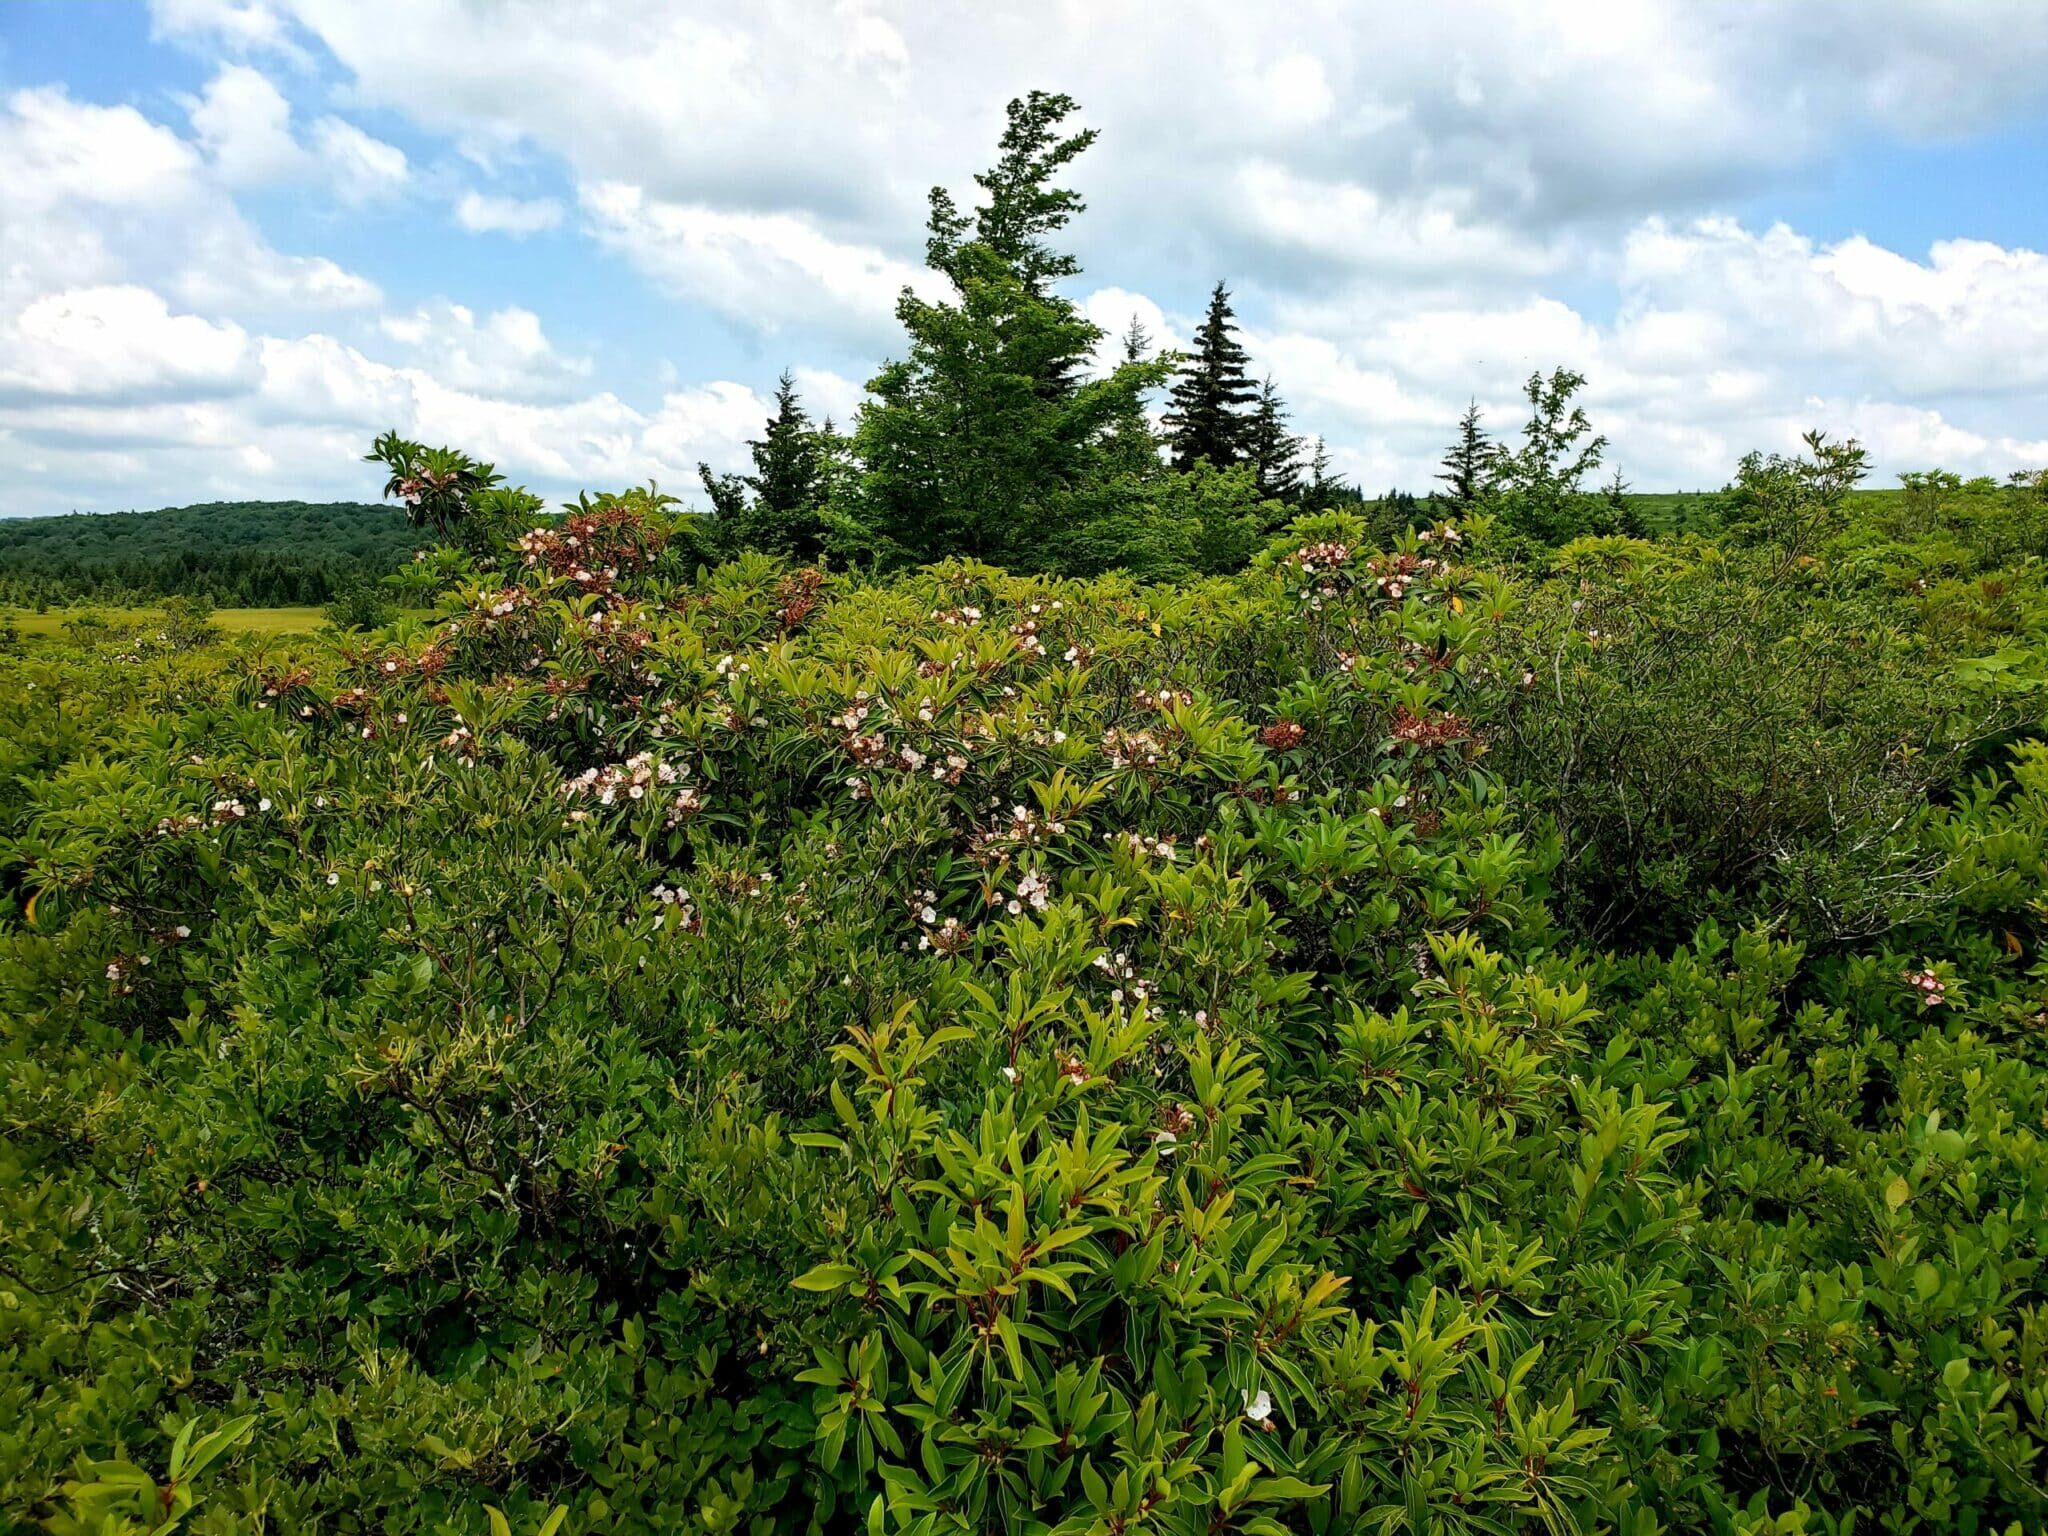 The Dolly Sods Wilderness.